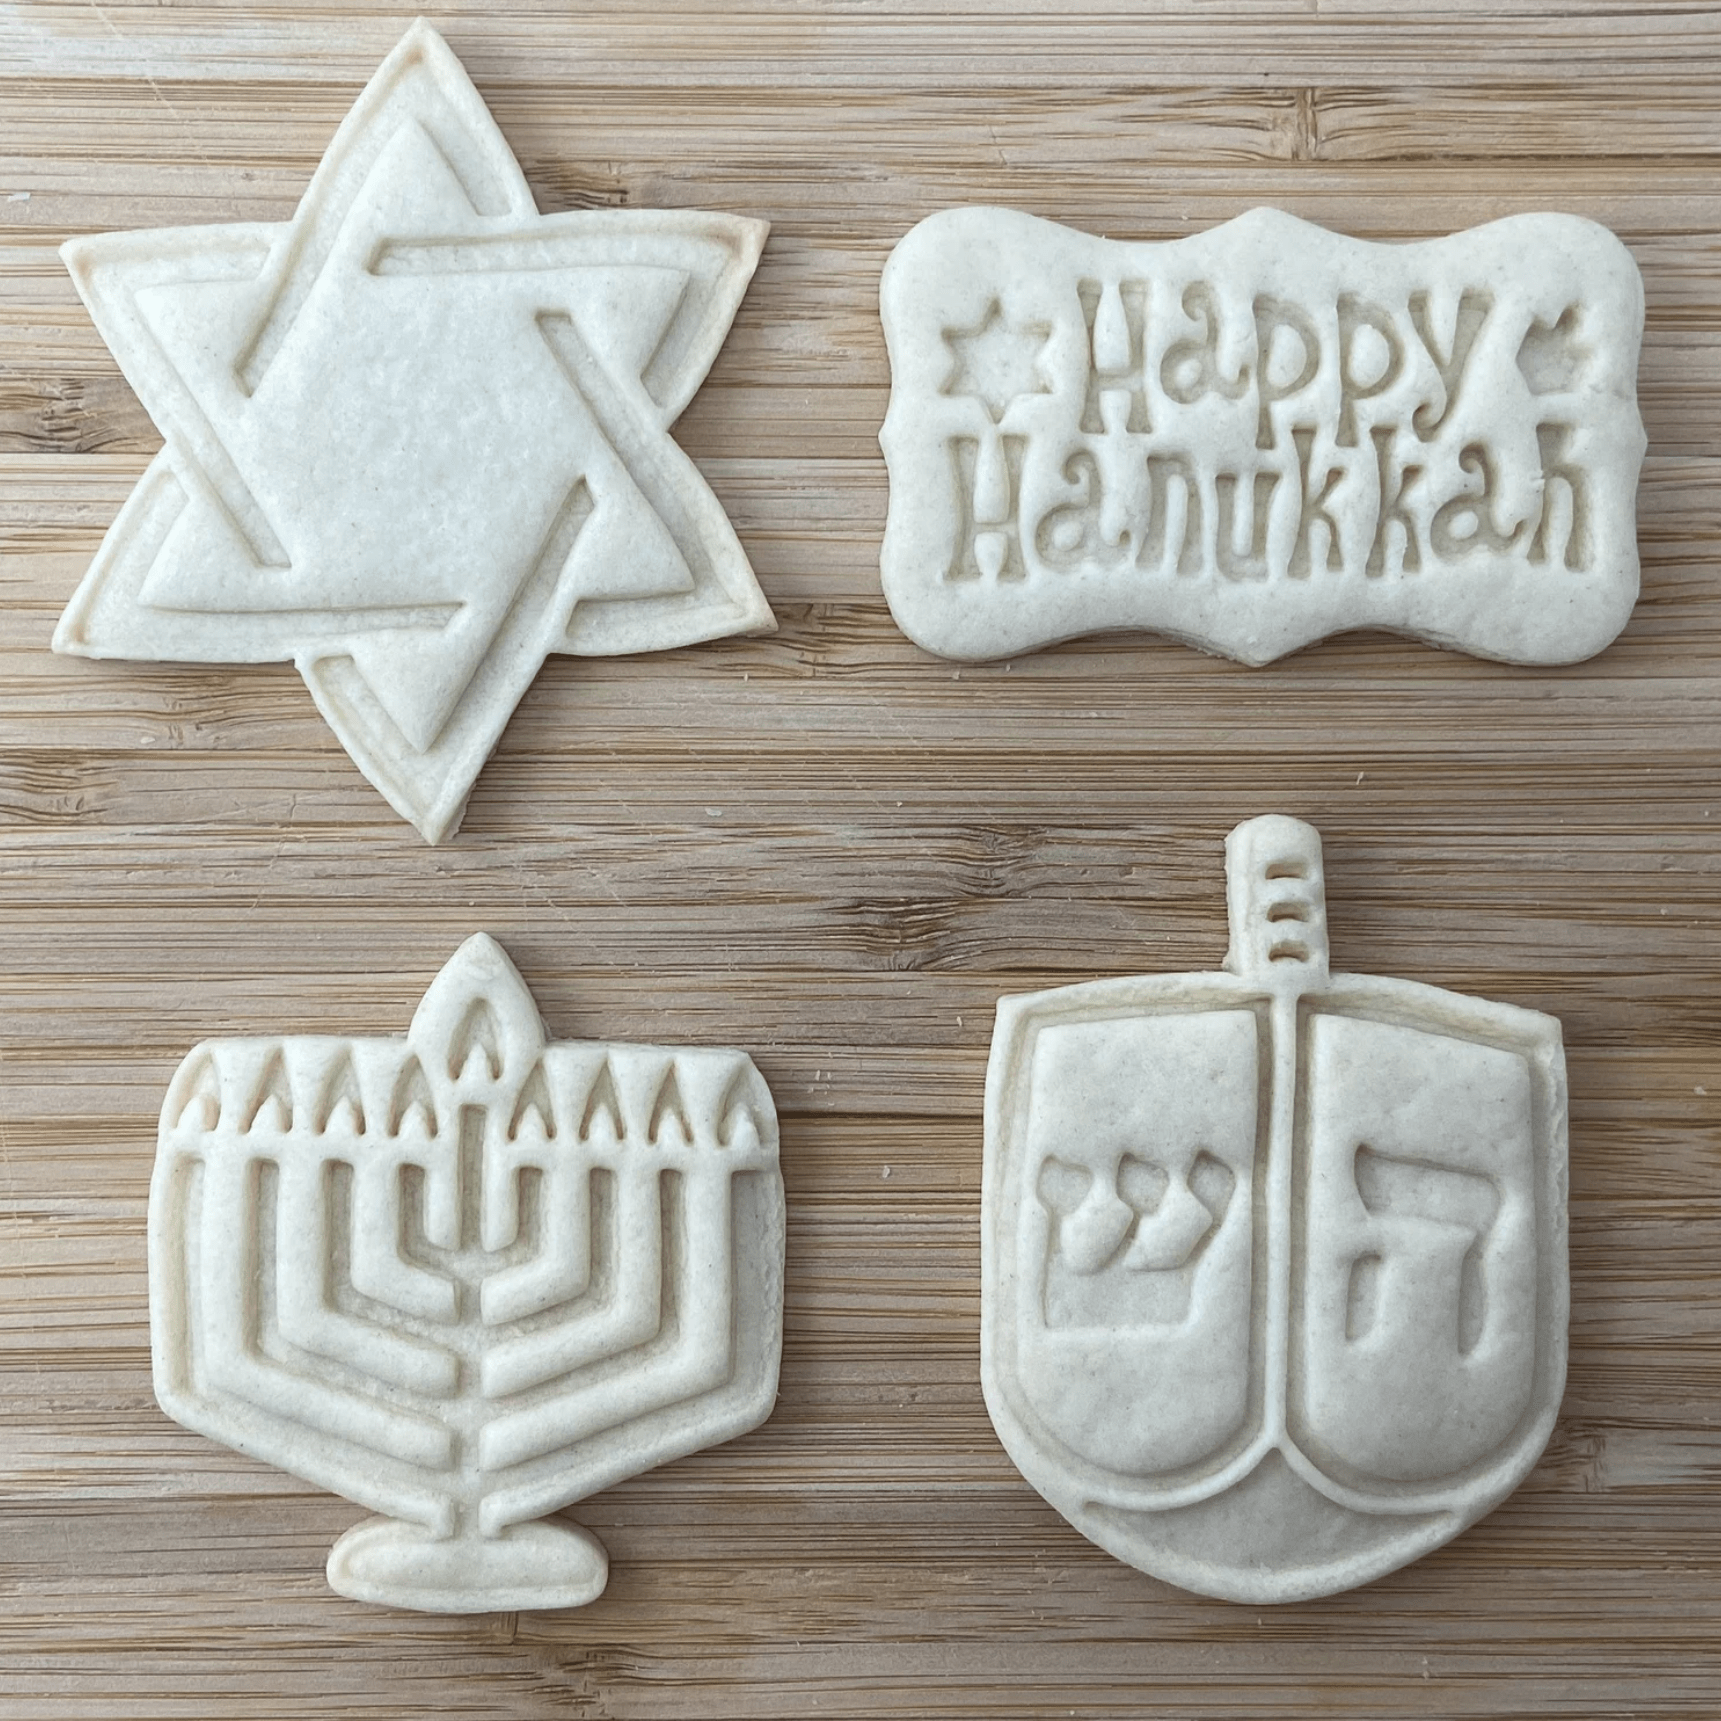 <p>Happy Hanukkah! Keep celebrations sweet with this <a href="https://www.etsy.com/listing/632220610/hanukkah-cookie-cutters-and-presses" rel="noopener">Hanukkah cookie cutter and press set</a>. Choose from four designs: Dreidel, Menorah, happy Hanukkah and Star of David. Or, score all four for an extra bright Festival of Lights cookie decorating party. Pair them with the <a href="https://www.tasteofhome.com/collection/best-hanukkah-decorations/">best Hanukkah decorations</a> to take all eight nights to the next level.</p> <p class="listicle-page__cta-button-shop"><a class="shop-btn" href="https://www.etsy.com/listing/632220610/hanukkah-cookie-cutters-and-presses">Shop Now</a></p>